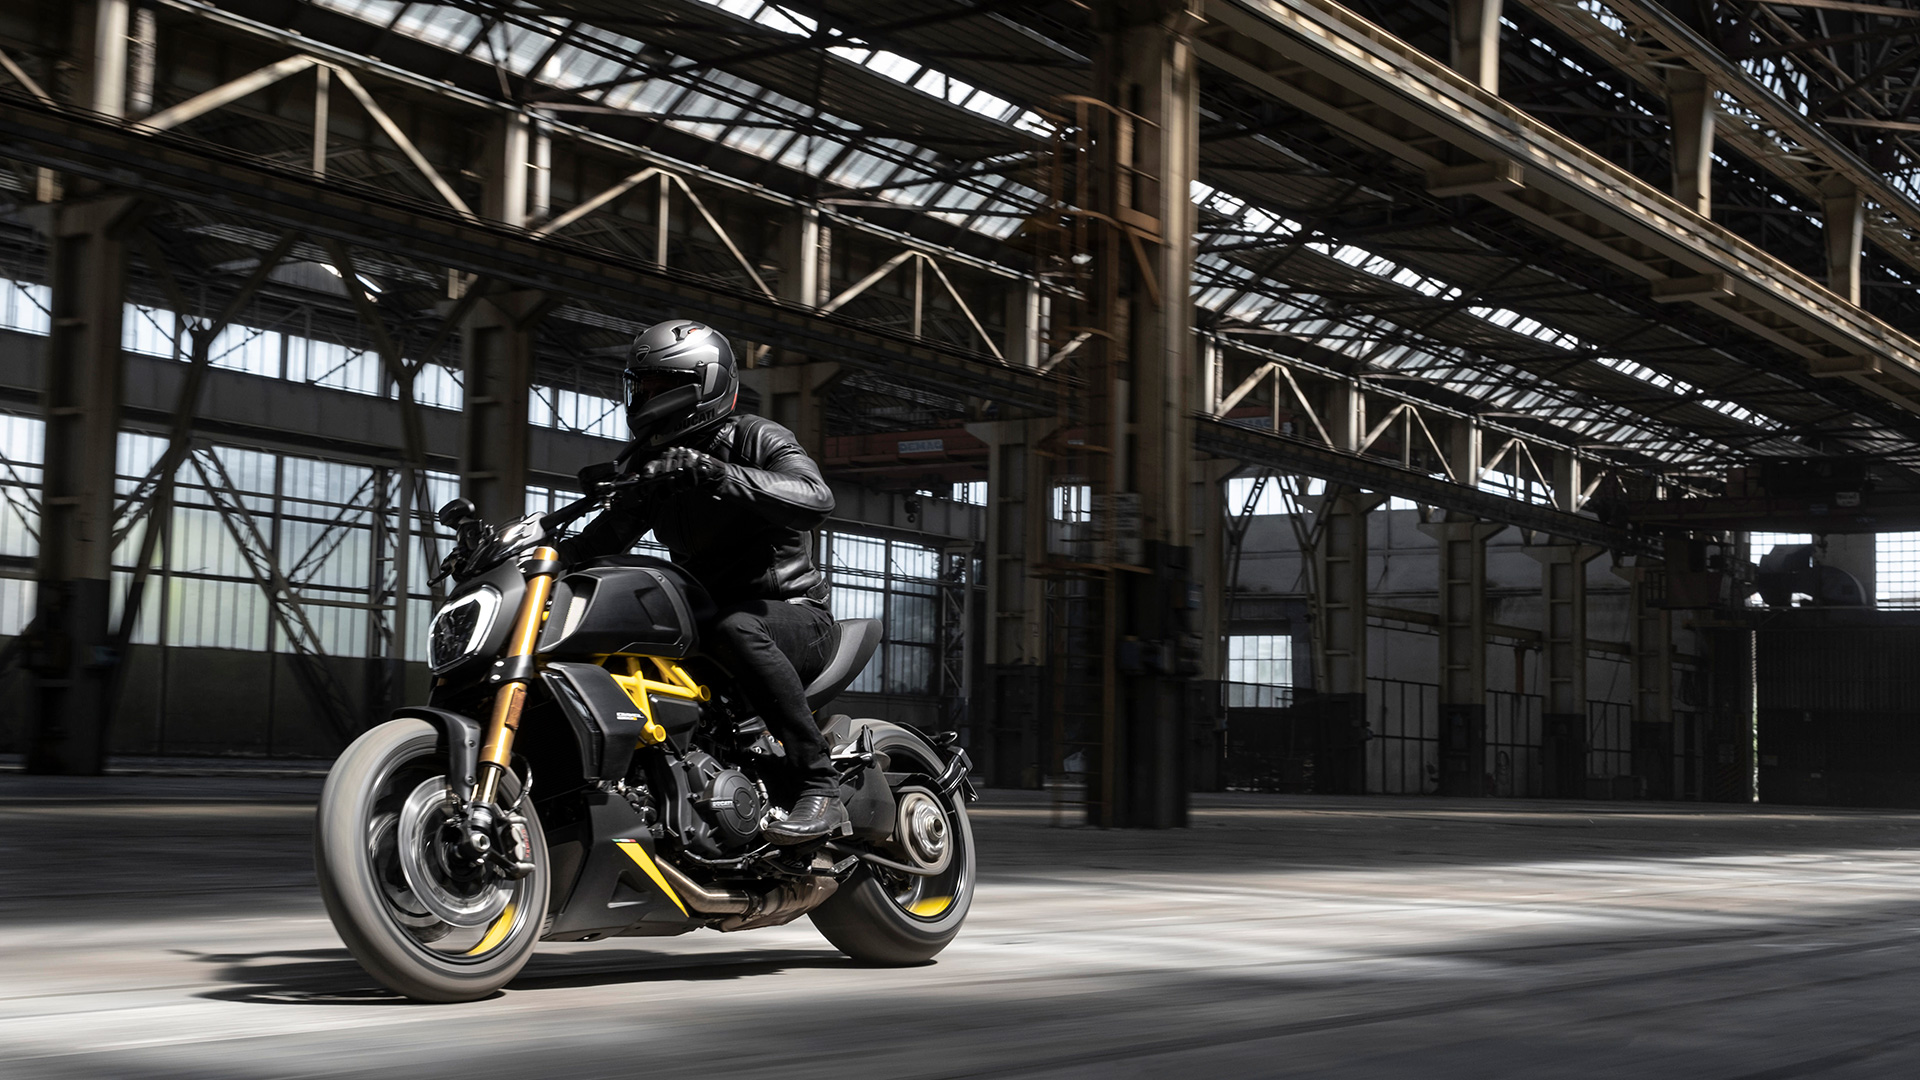 Rider on a 2022 Ducati Diavel 1260 S inside a warehouse